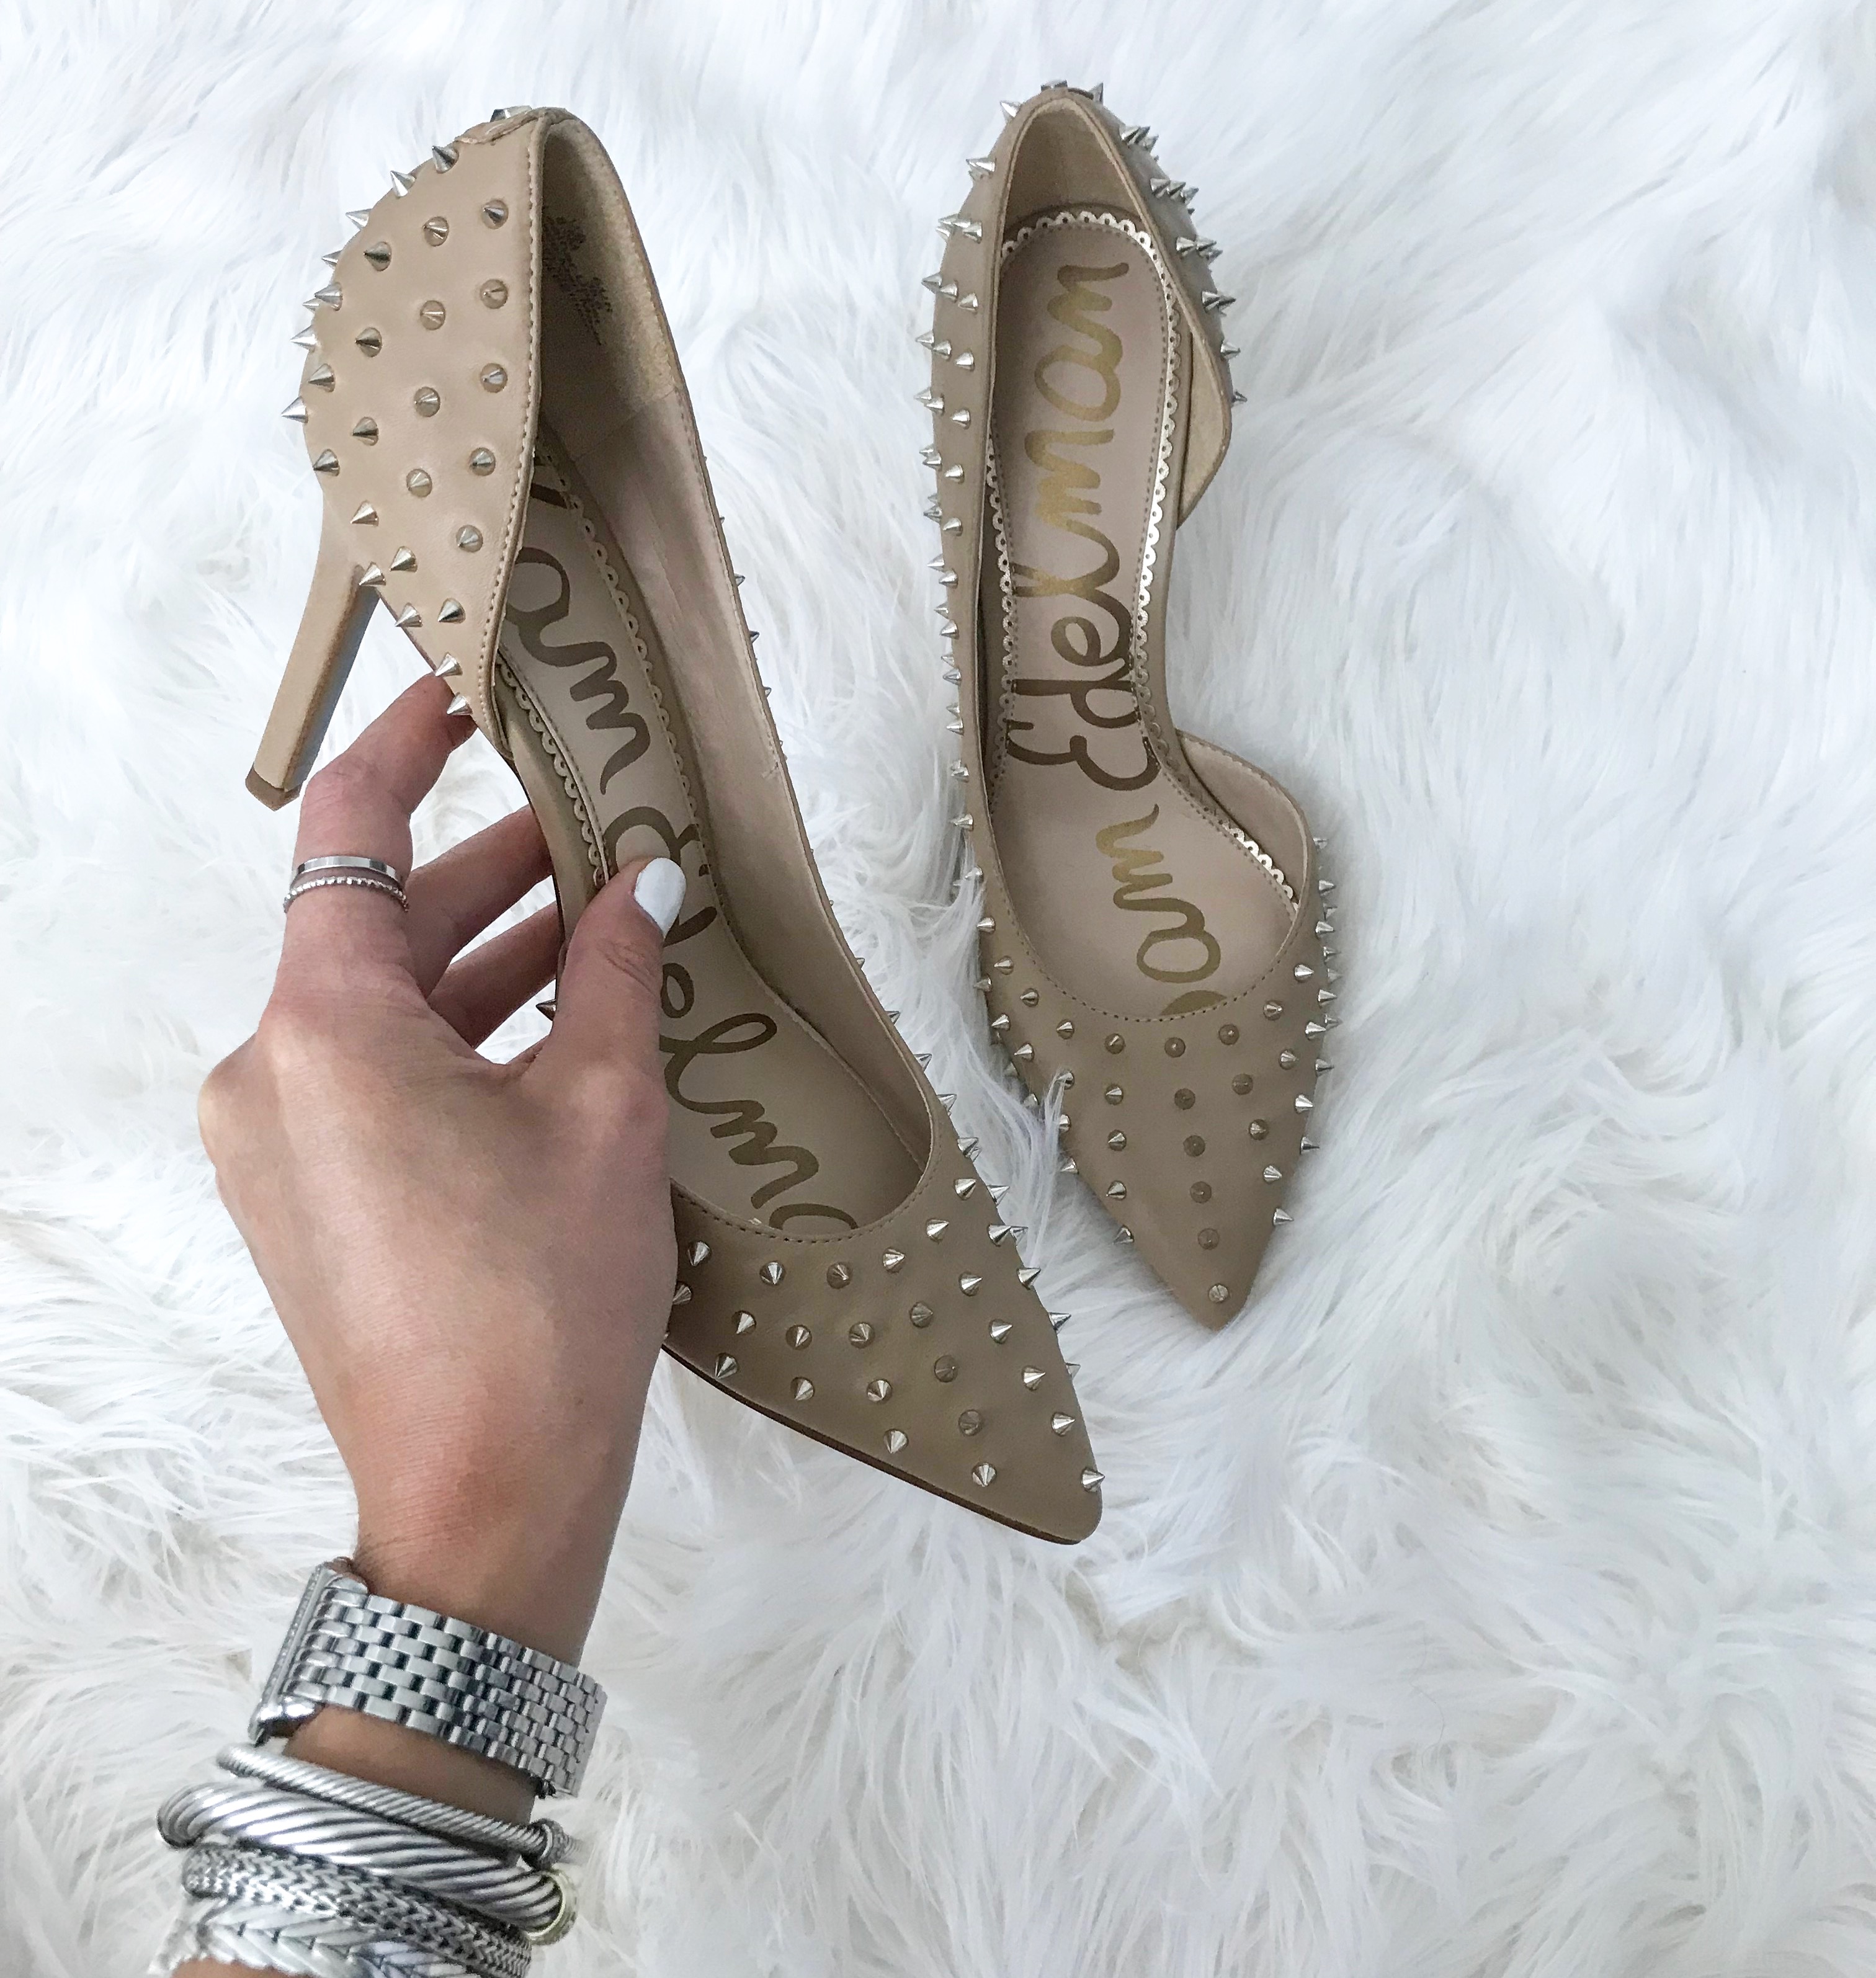 Studded Pumps – The Fashion Able Eye